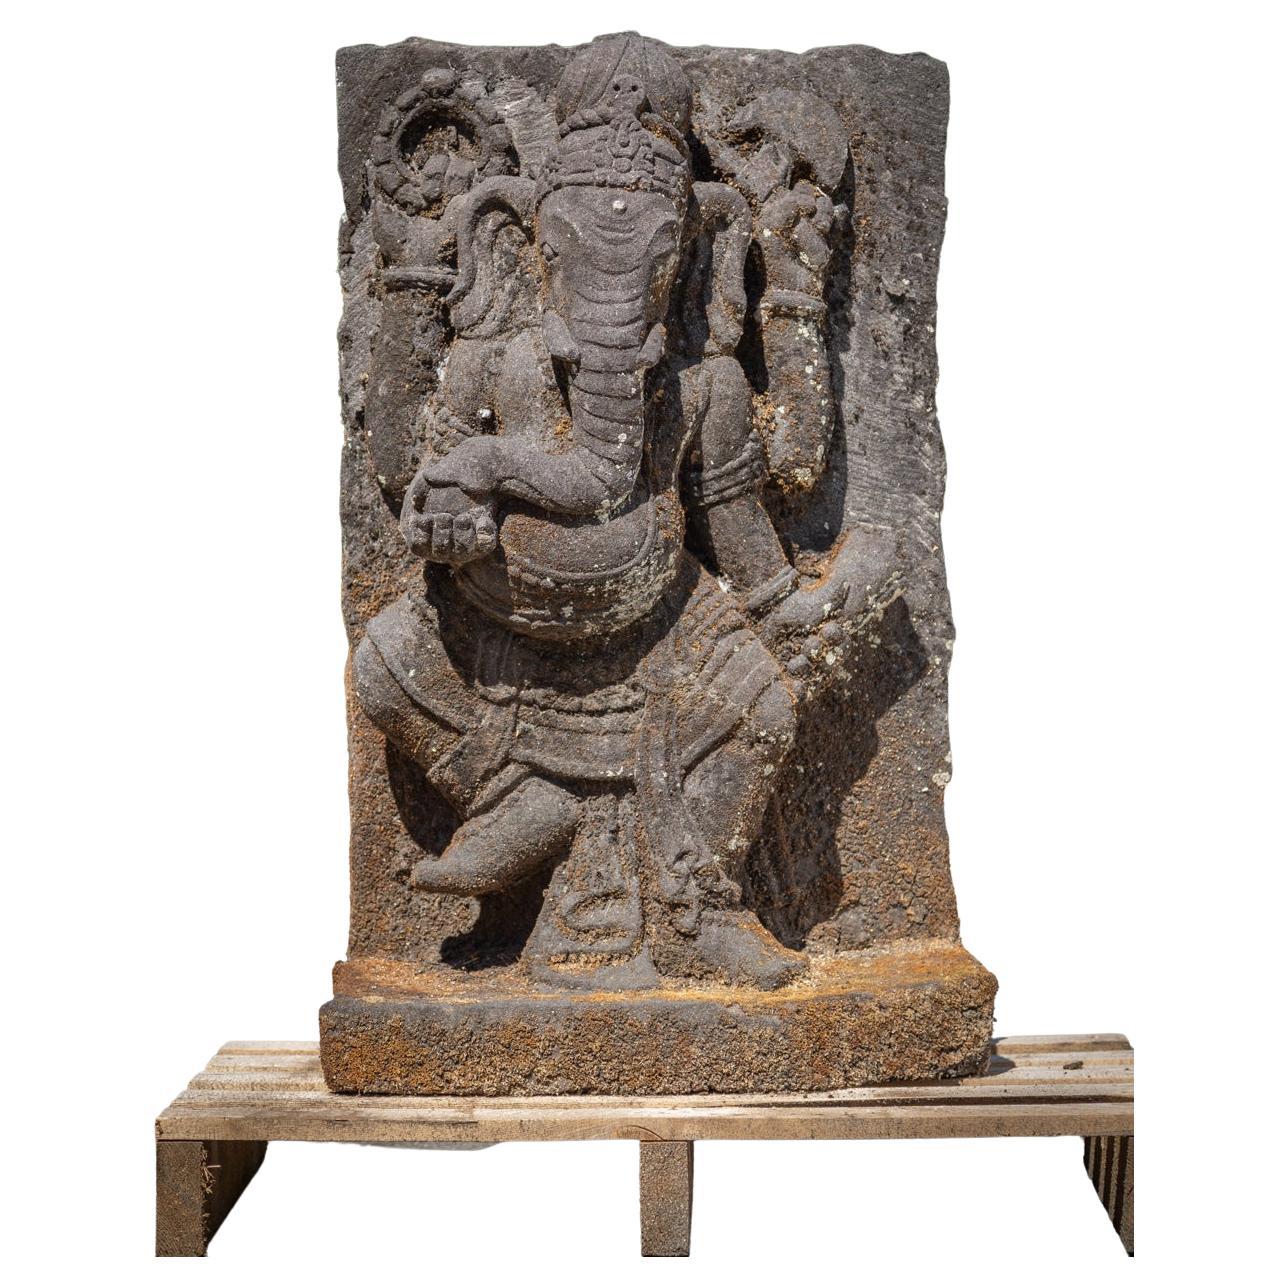 Mid 20th Century Old lavastone Ganesha statue from Indonesia For Sale